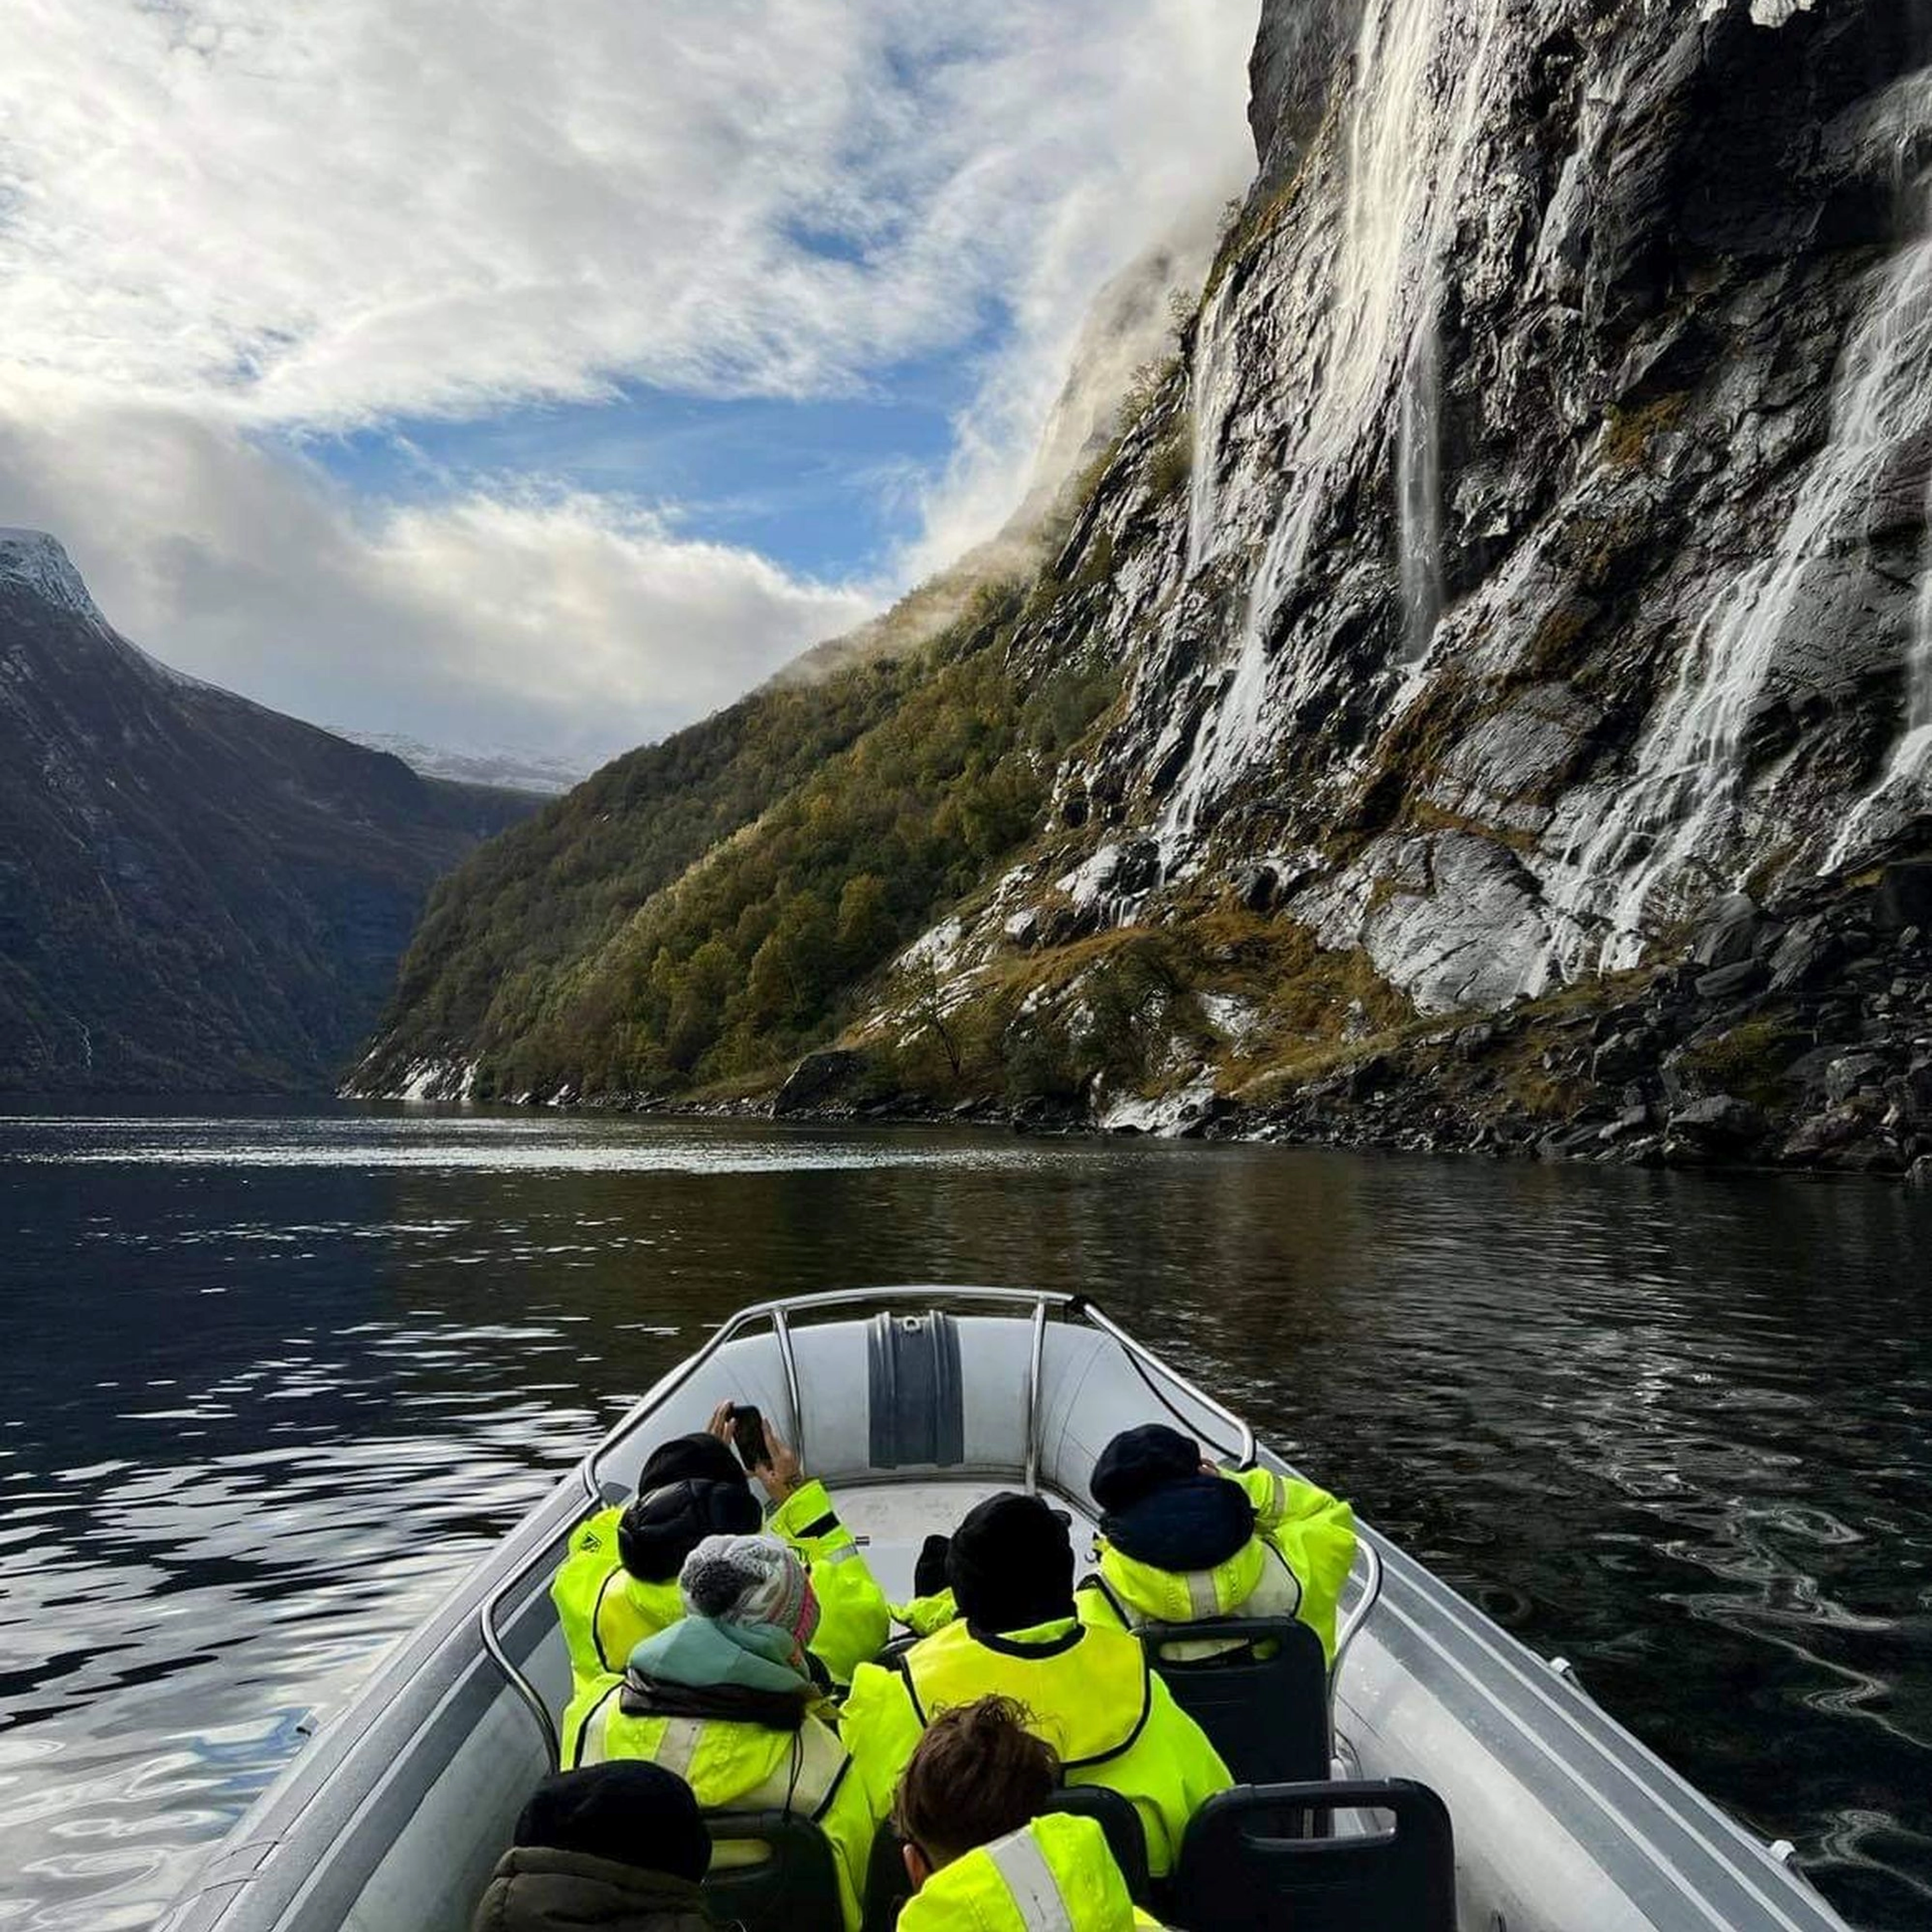 Winter adventure on the Geirangerfjord - RIB boat trip in Geiranger, Norway